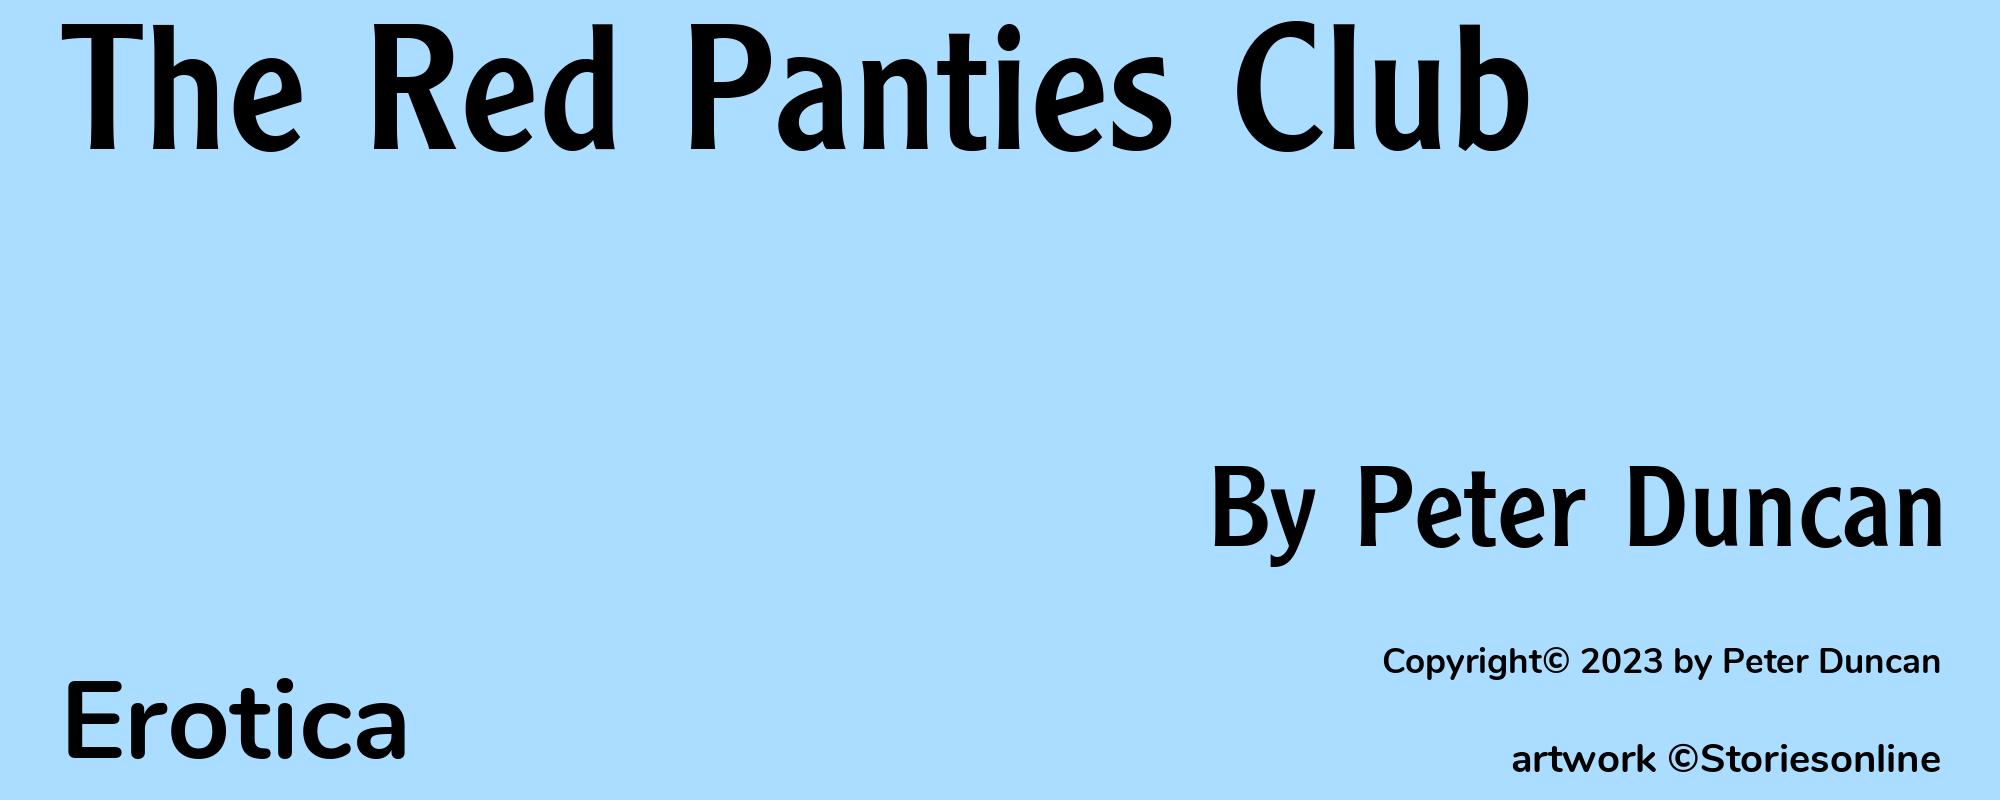 The Red Panties Club - Cover